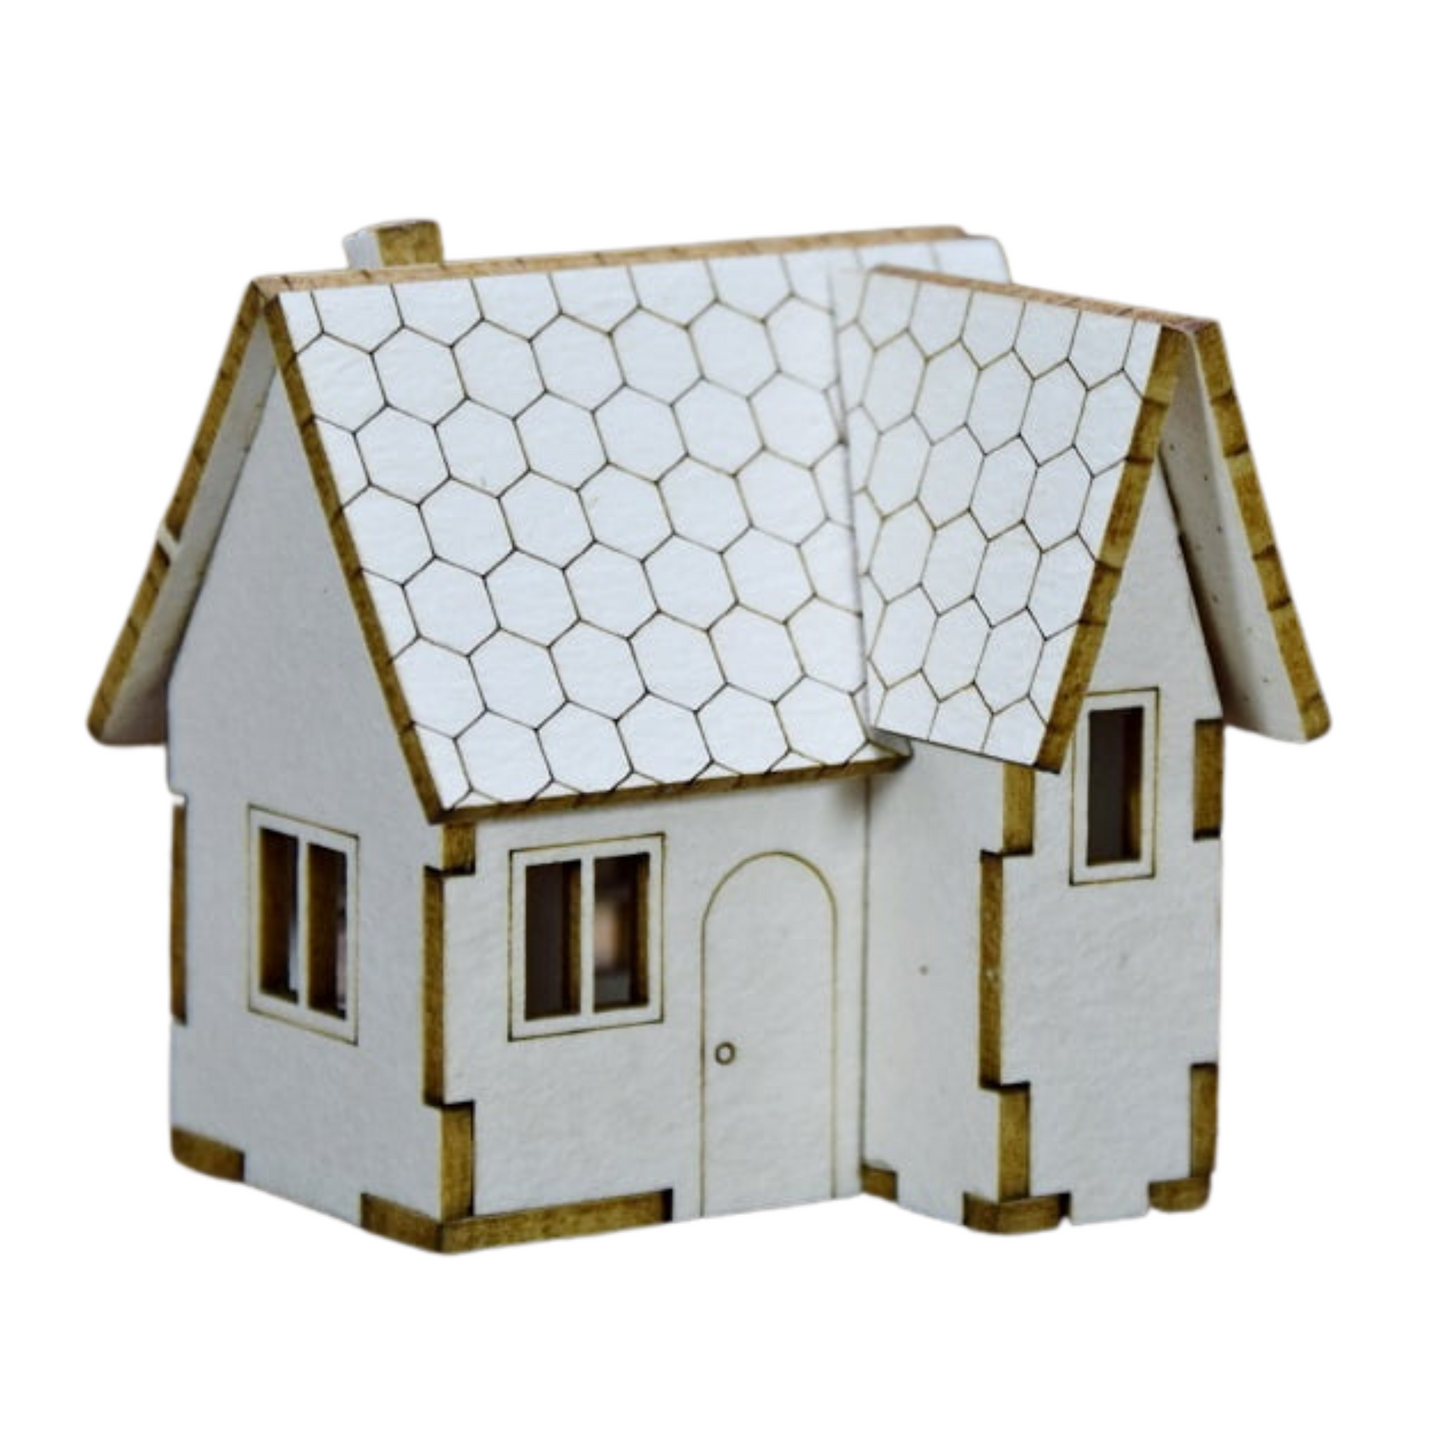 Tiny House #14 from the Little Town Collection by Snipart available at Milton's Daughter.